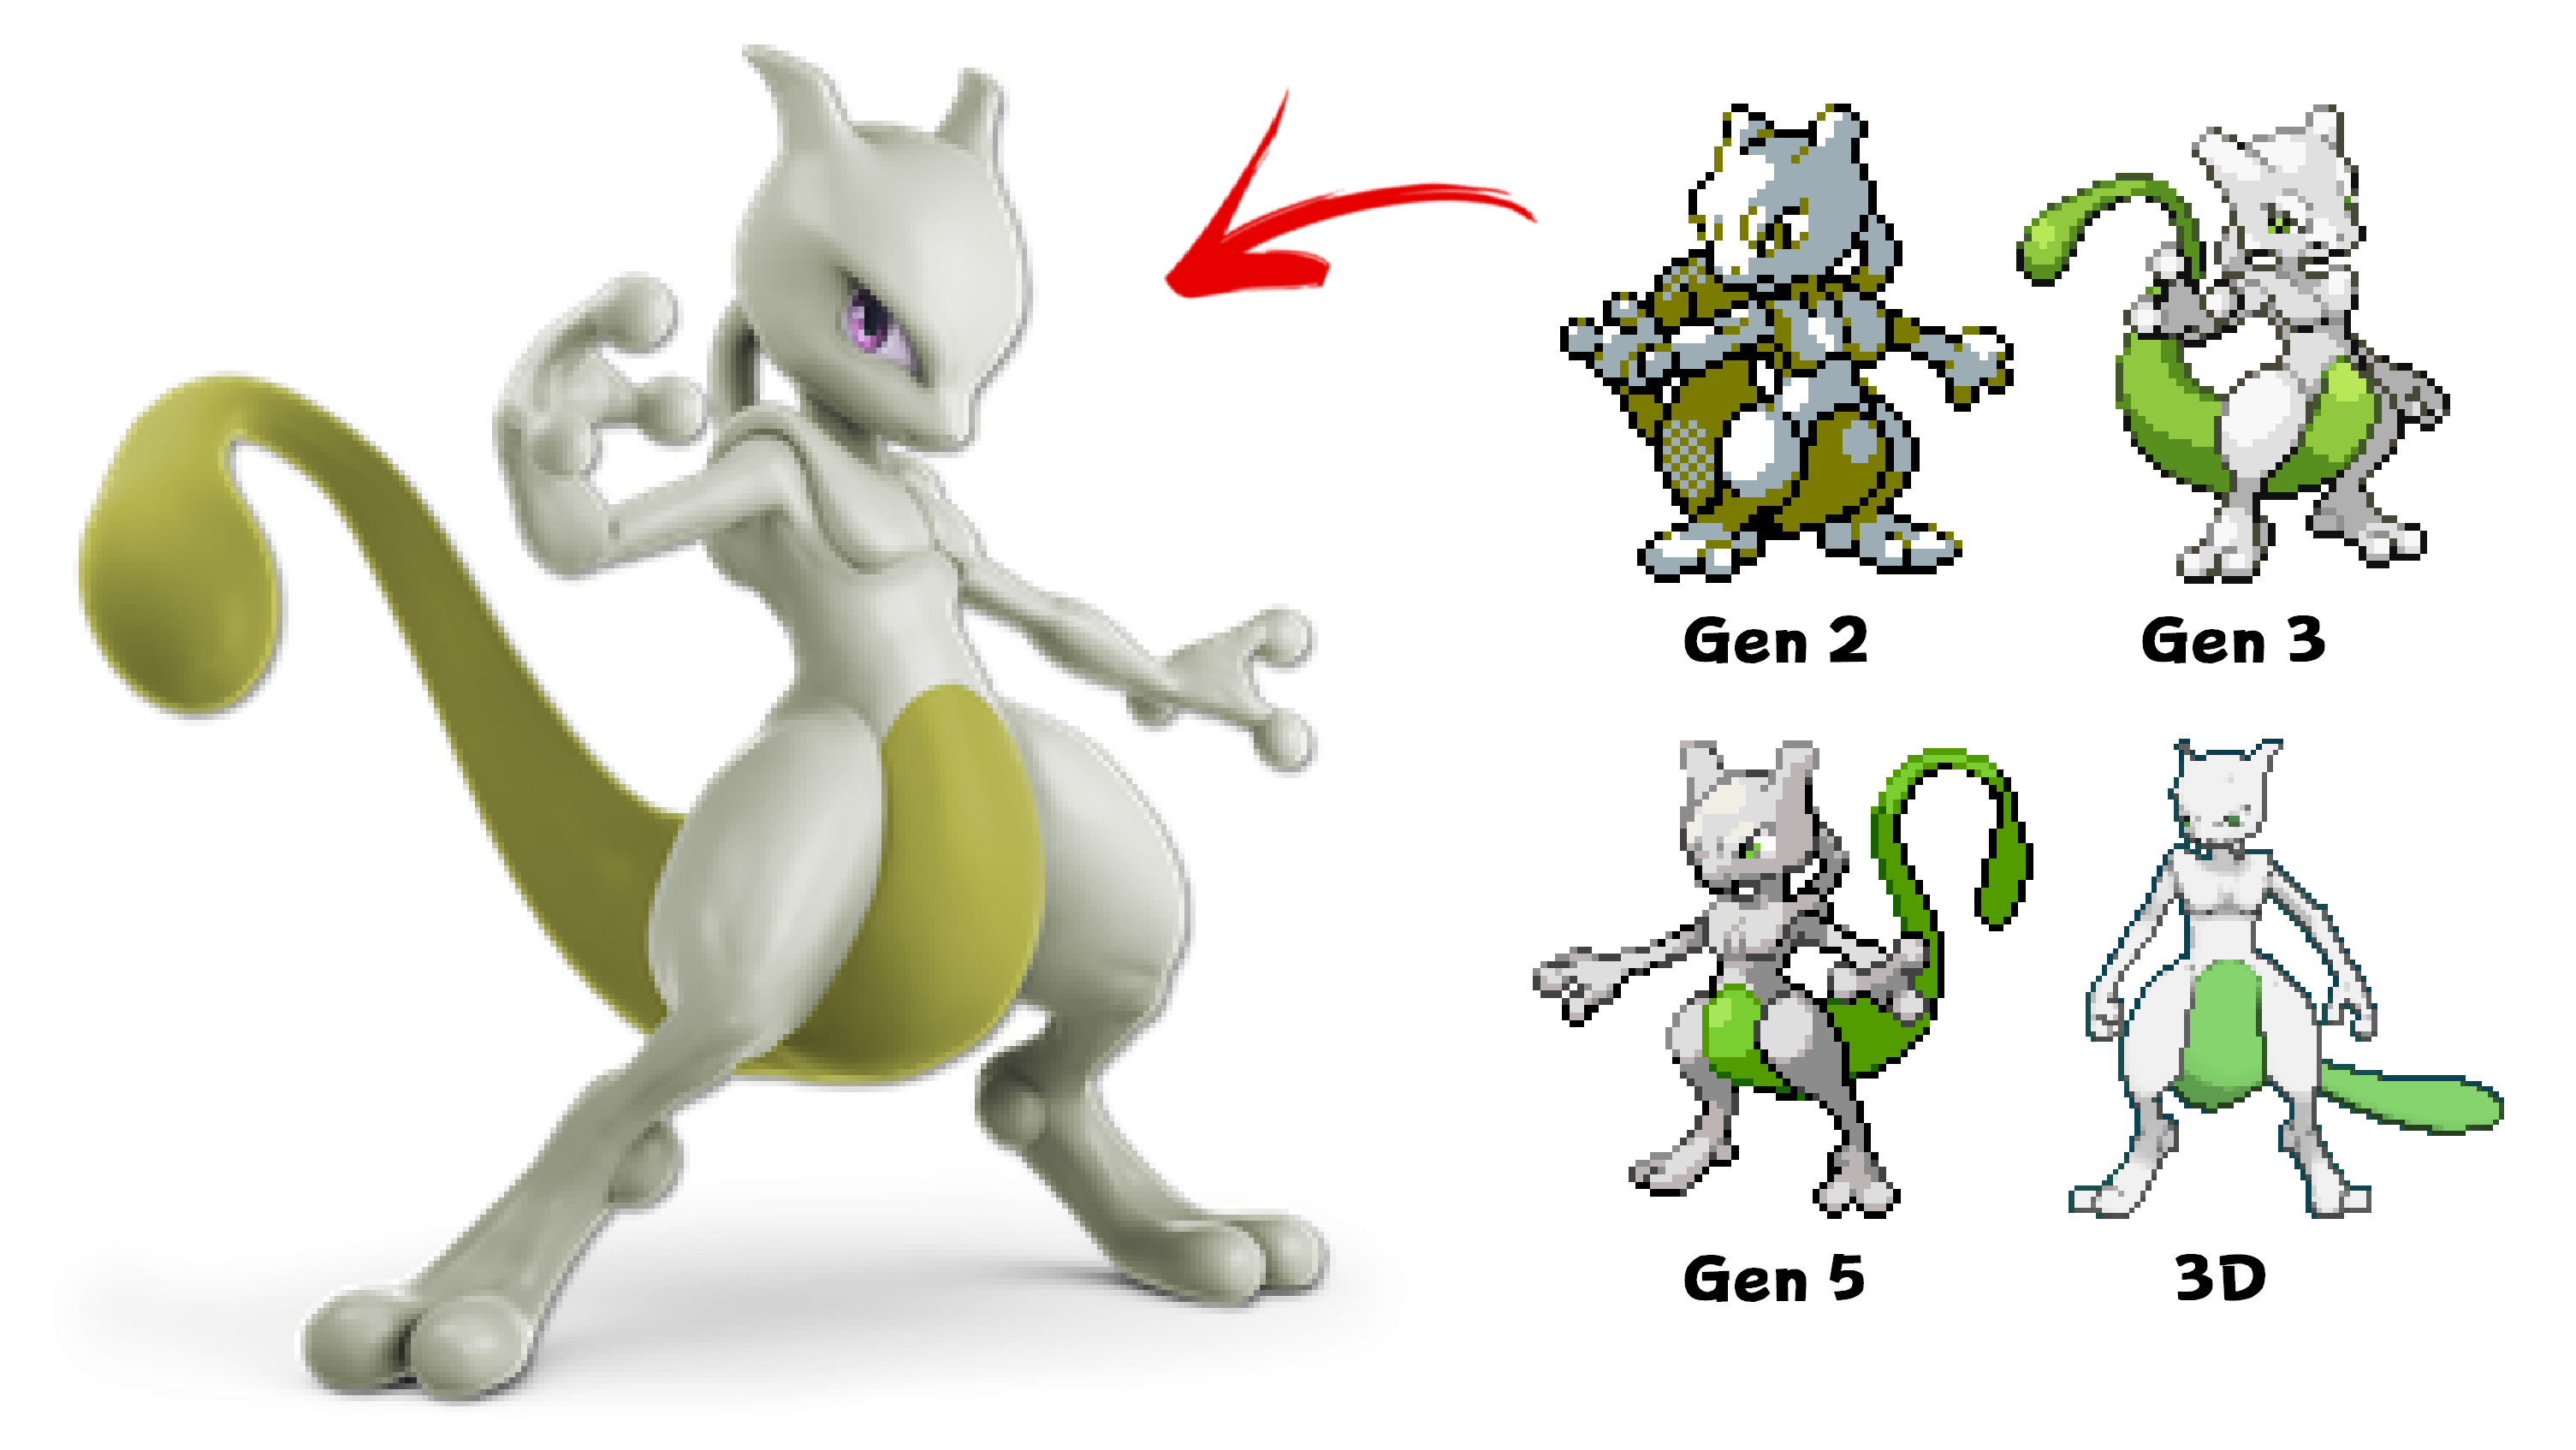 Dr. Lava on X: Banished to Smash: Shiny Mewtwo was originally yellow, but  later got changed to green. Yellow Mewtwo no longer exists in the Pokemon  series, but there's still one place